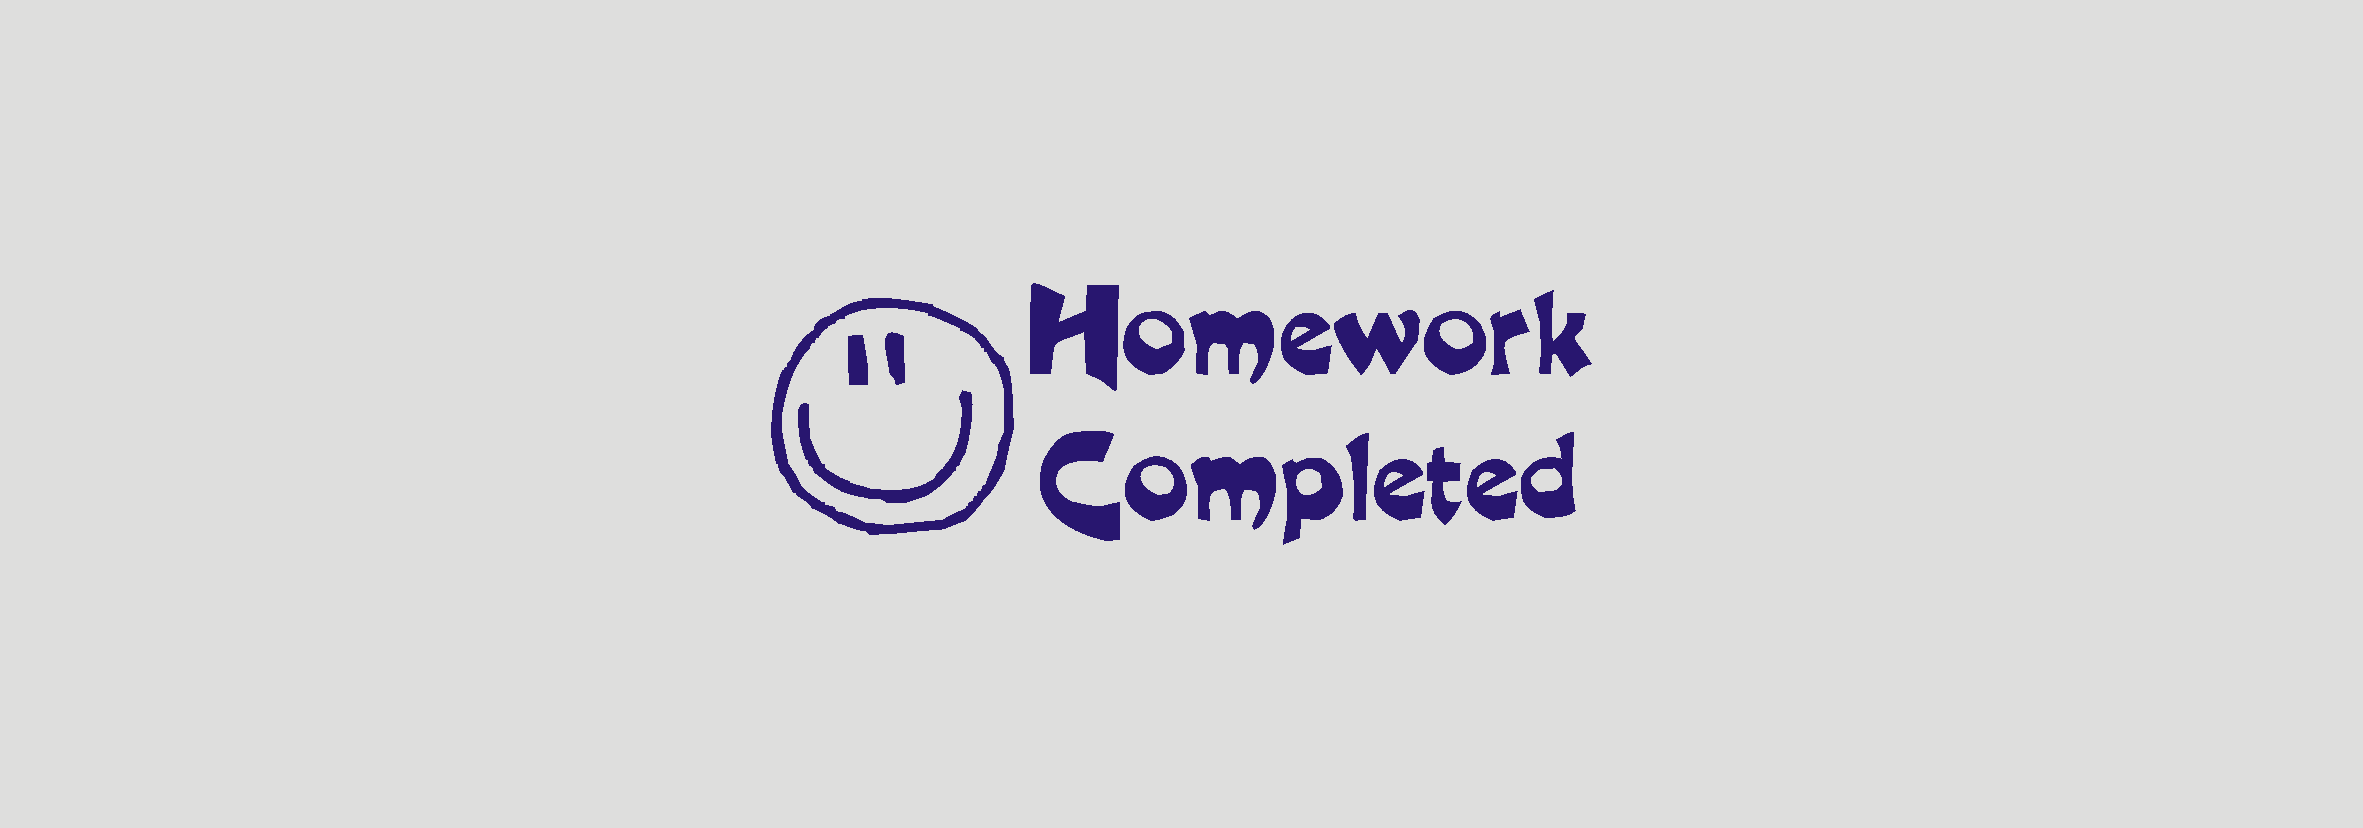 homework not completed stamp